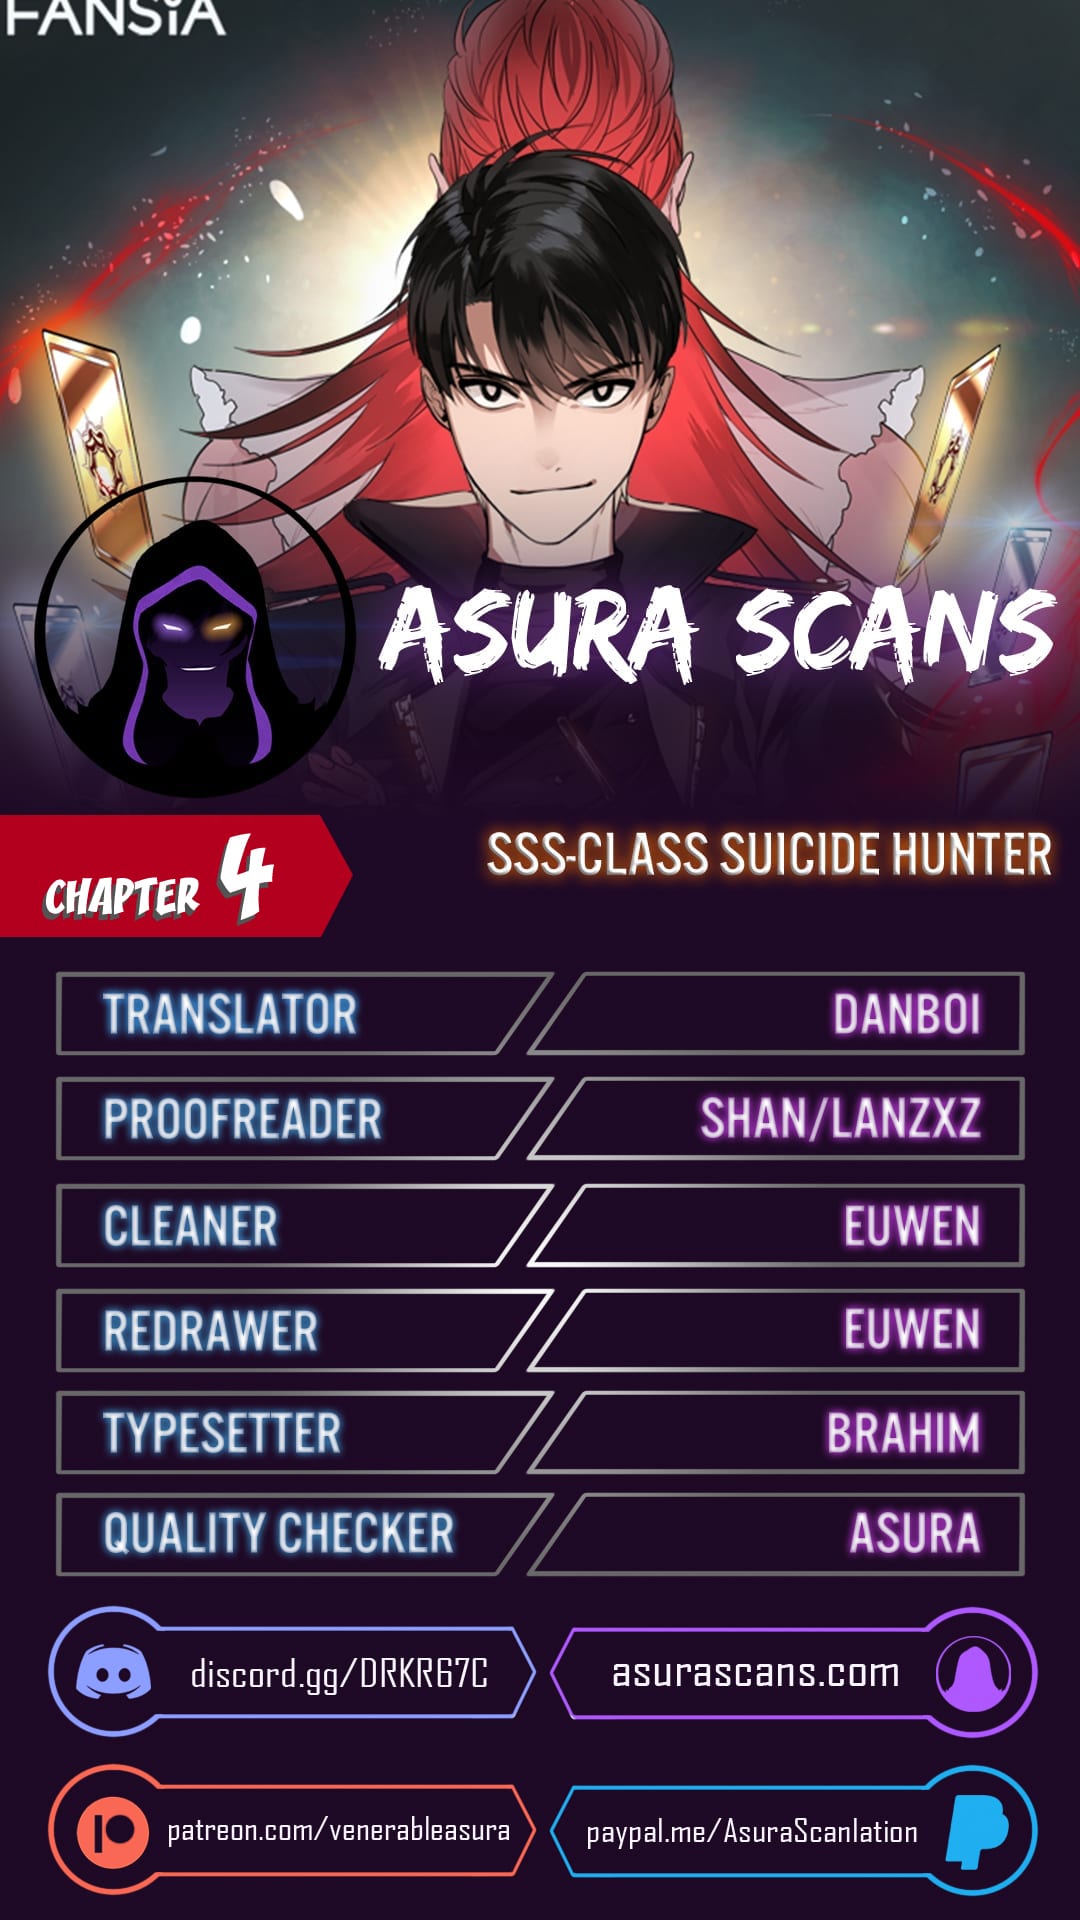 SSS-Class Suicide Hunter chapter 4